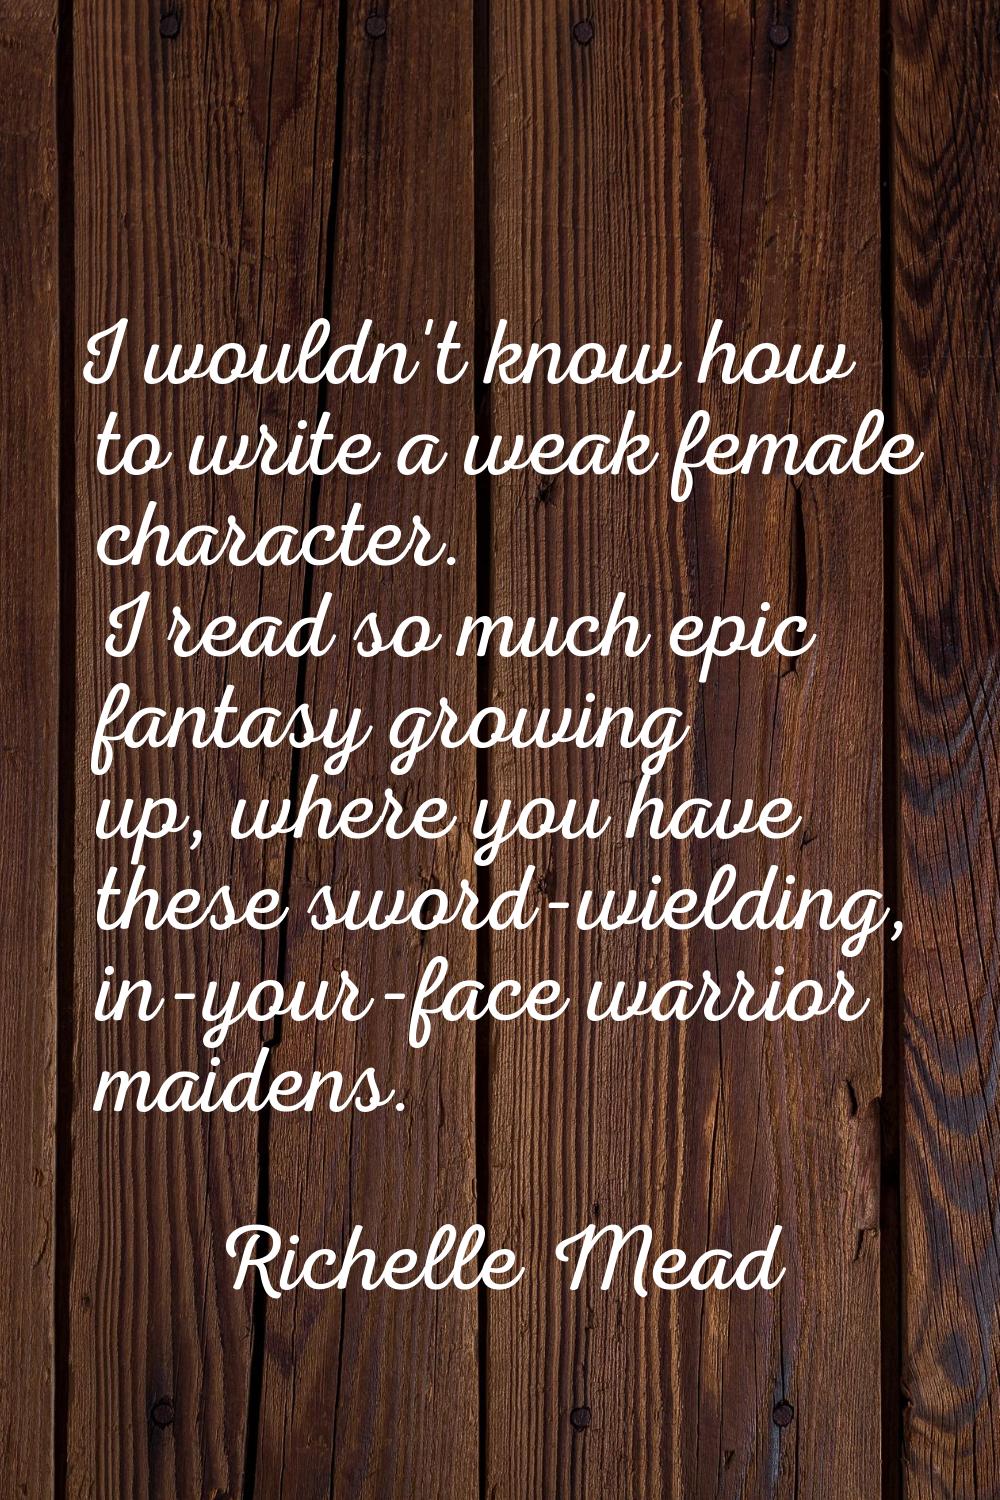 I wouldn't know how to write a weak female character. I read so much epic fantasy growing up, where